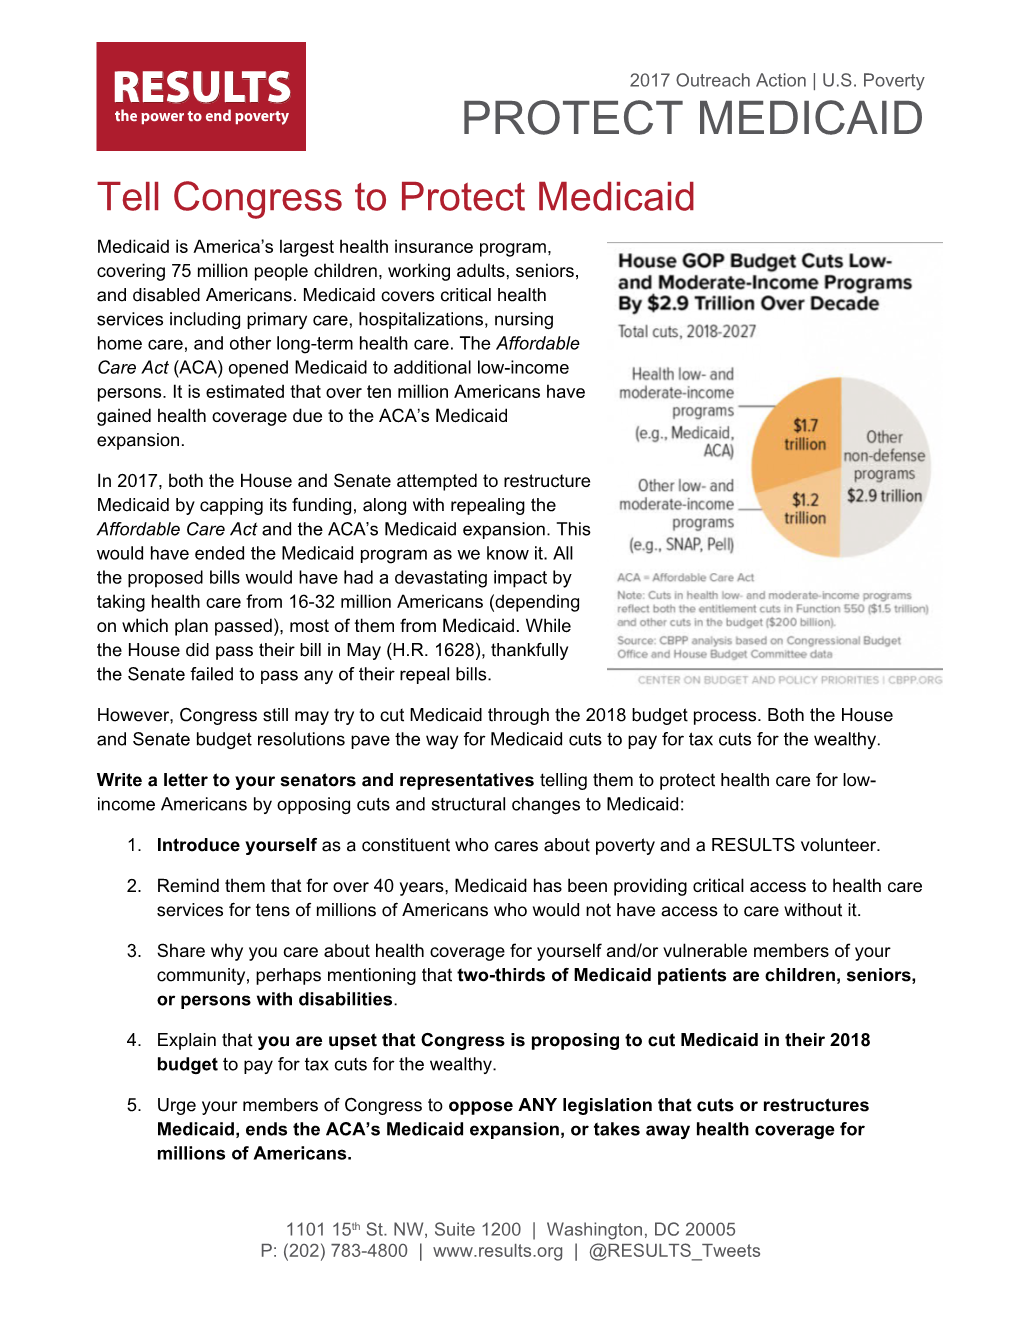 Tell Congress to Protect Medicaid